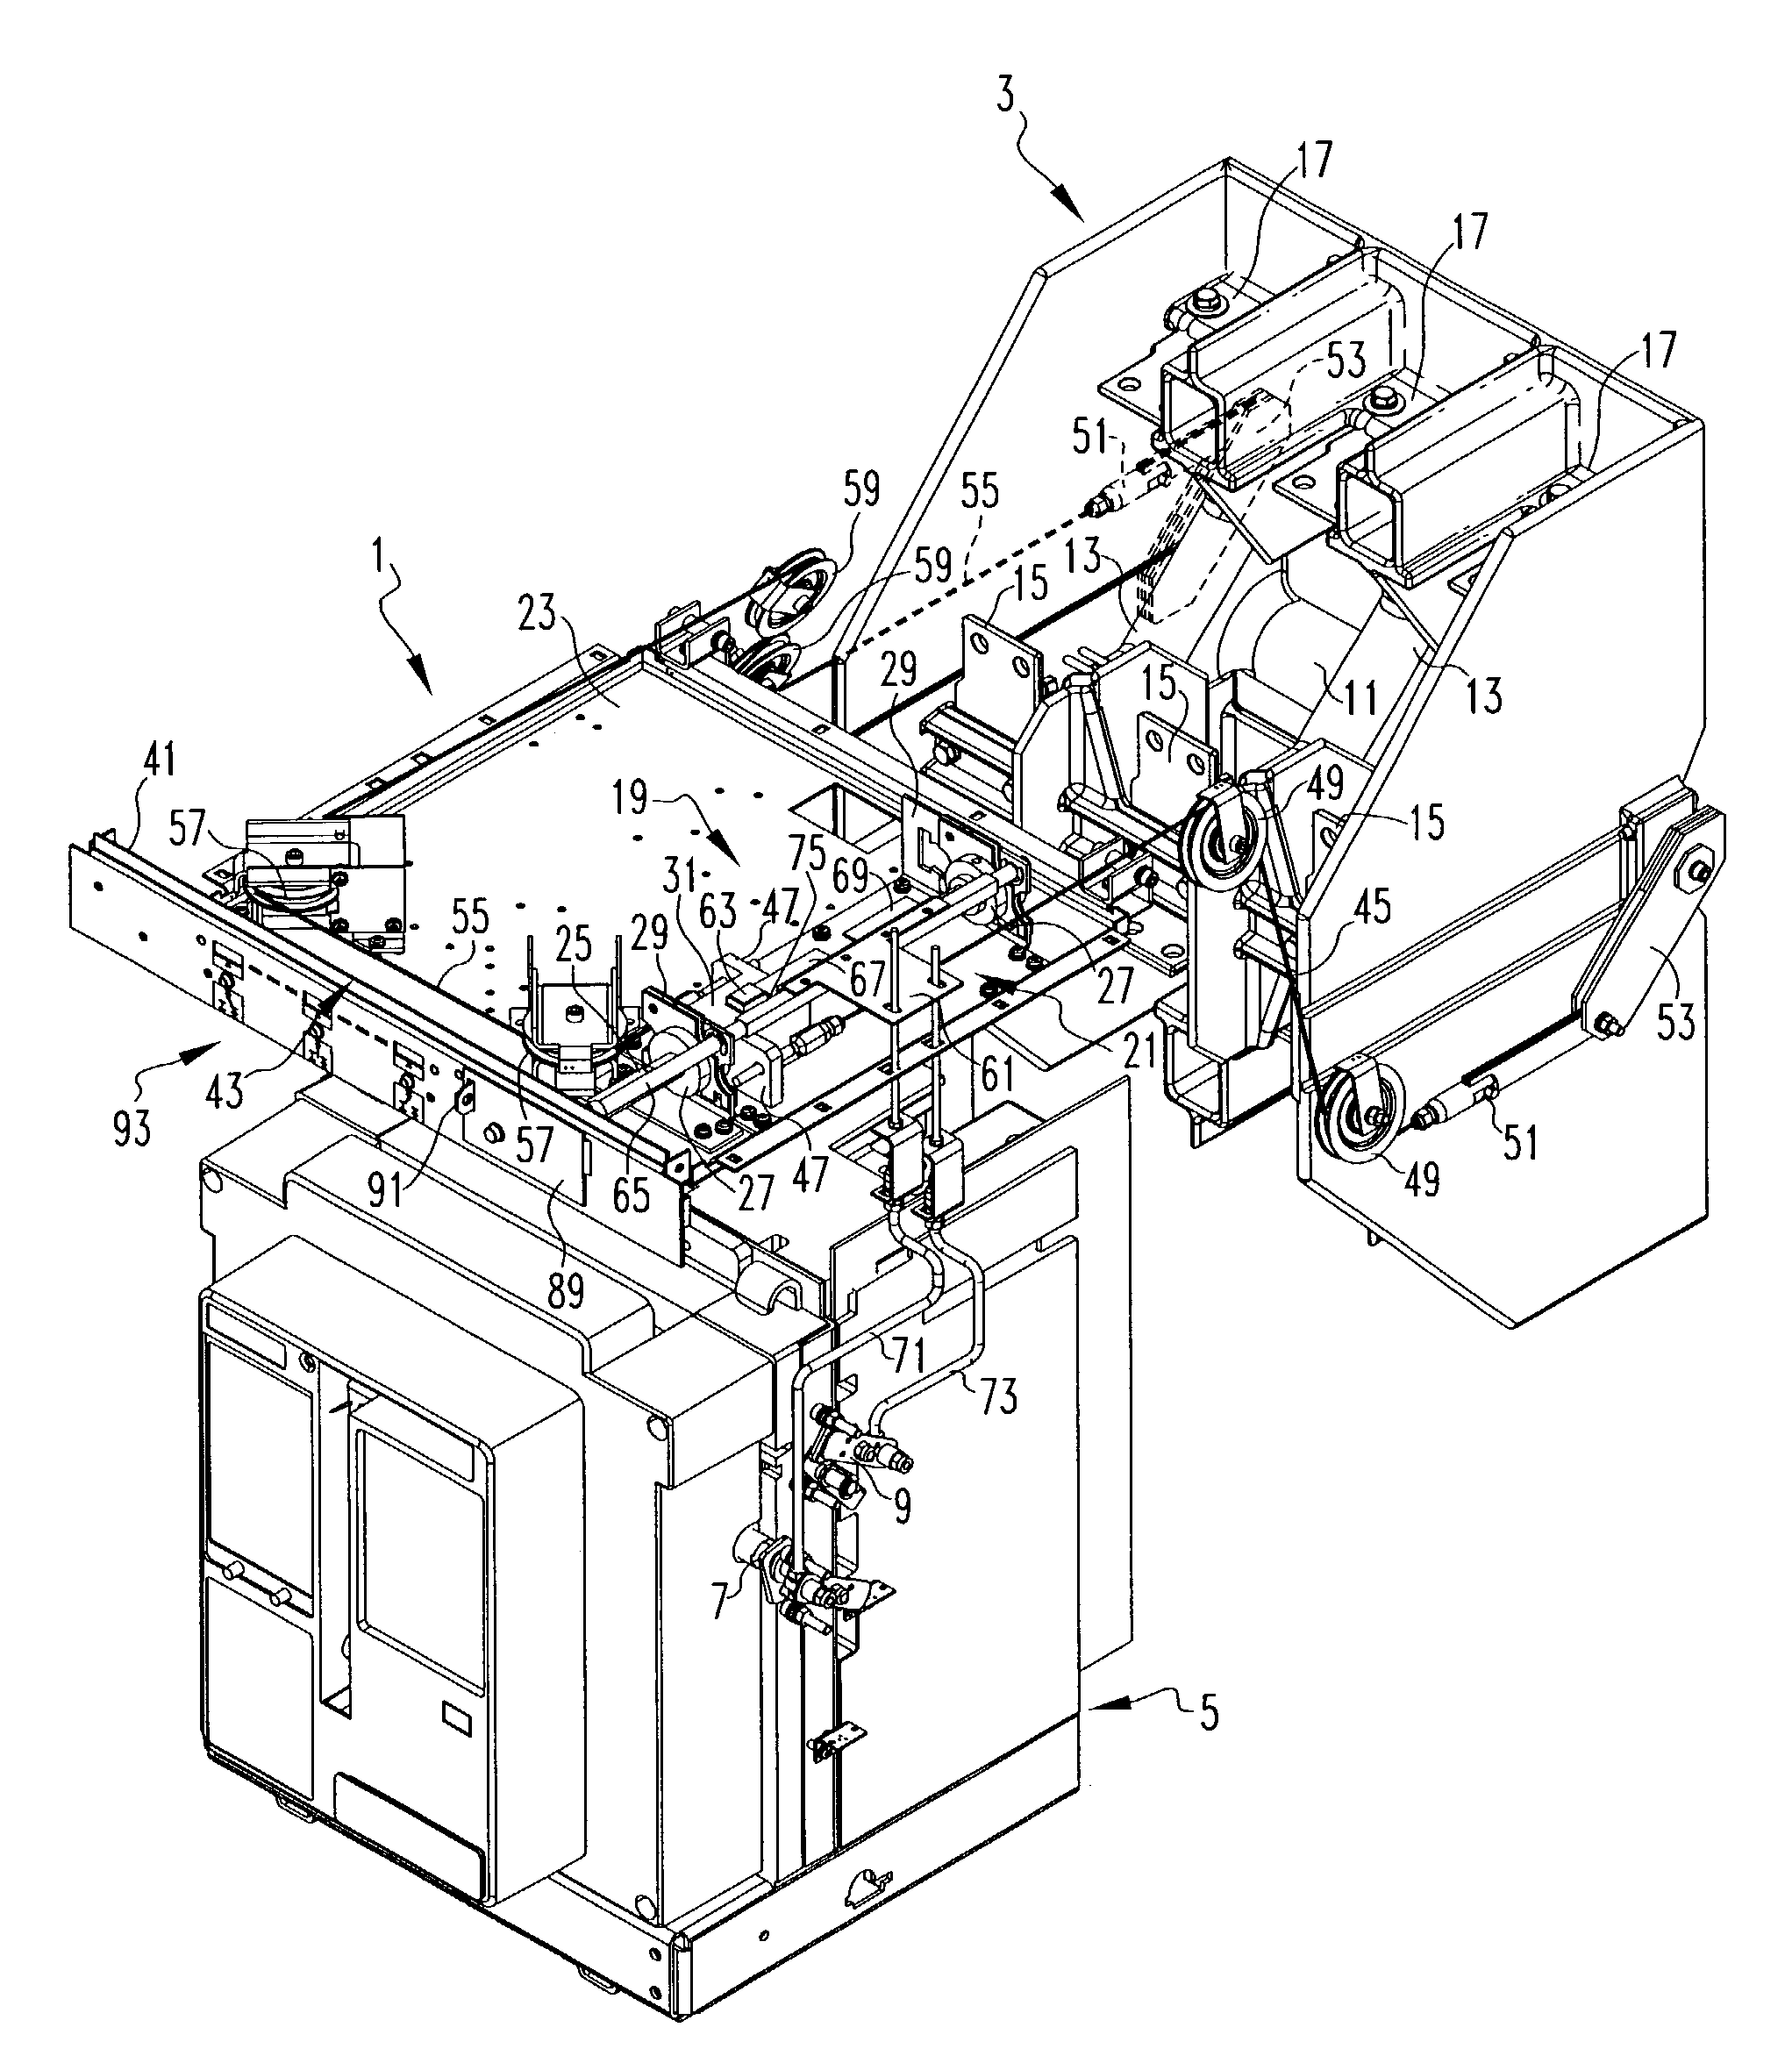 Apparatus operating an isolation switch in coordination with a circuit breaker